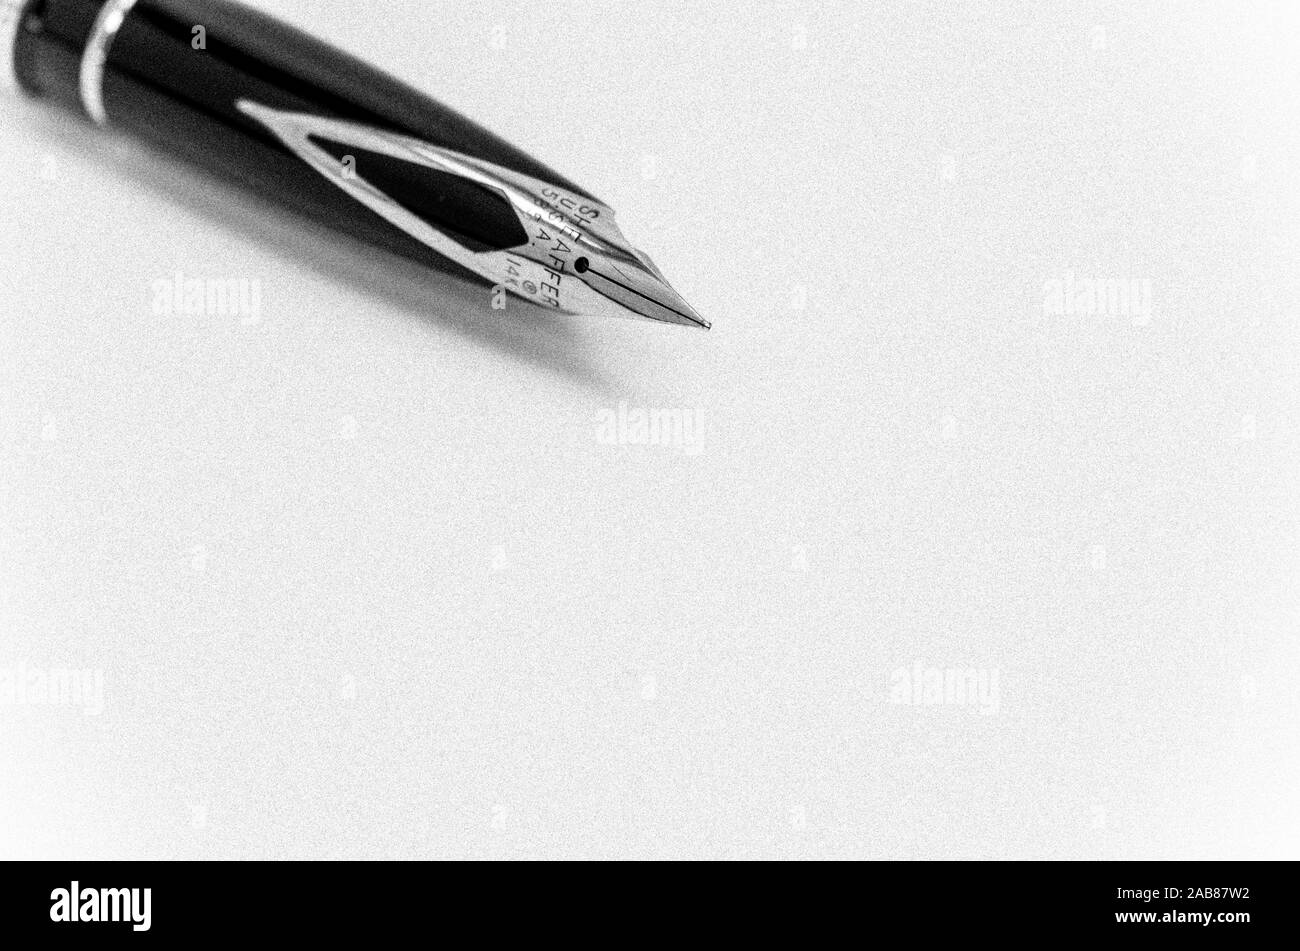 everyday objects close up - fountain pen on white background Stock Photo